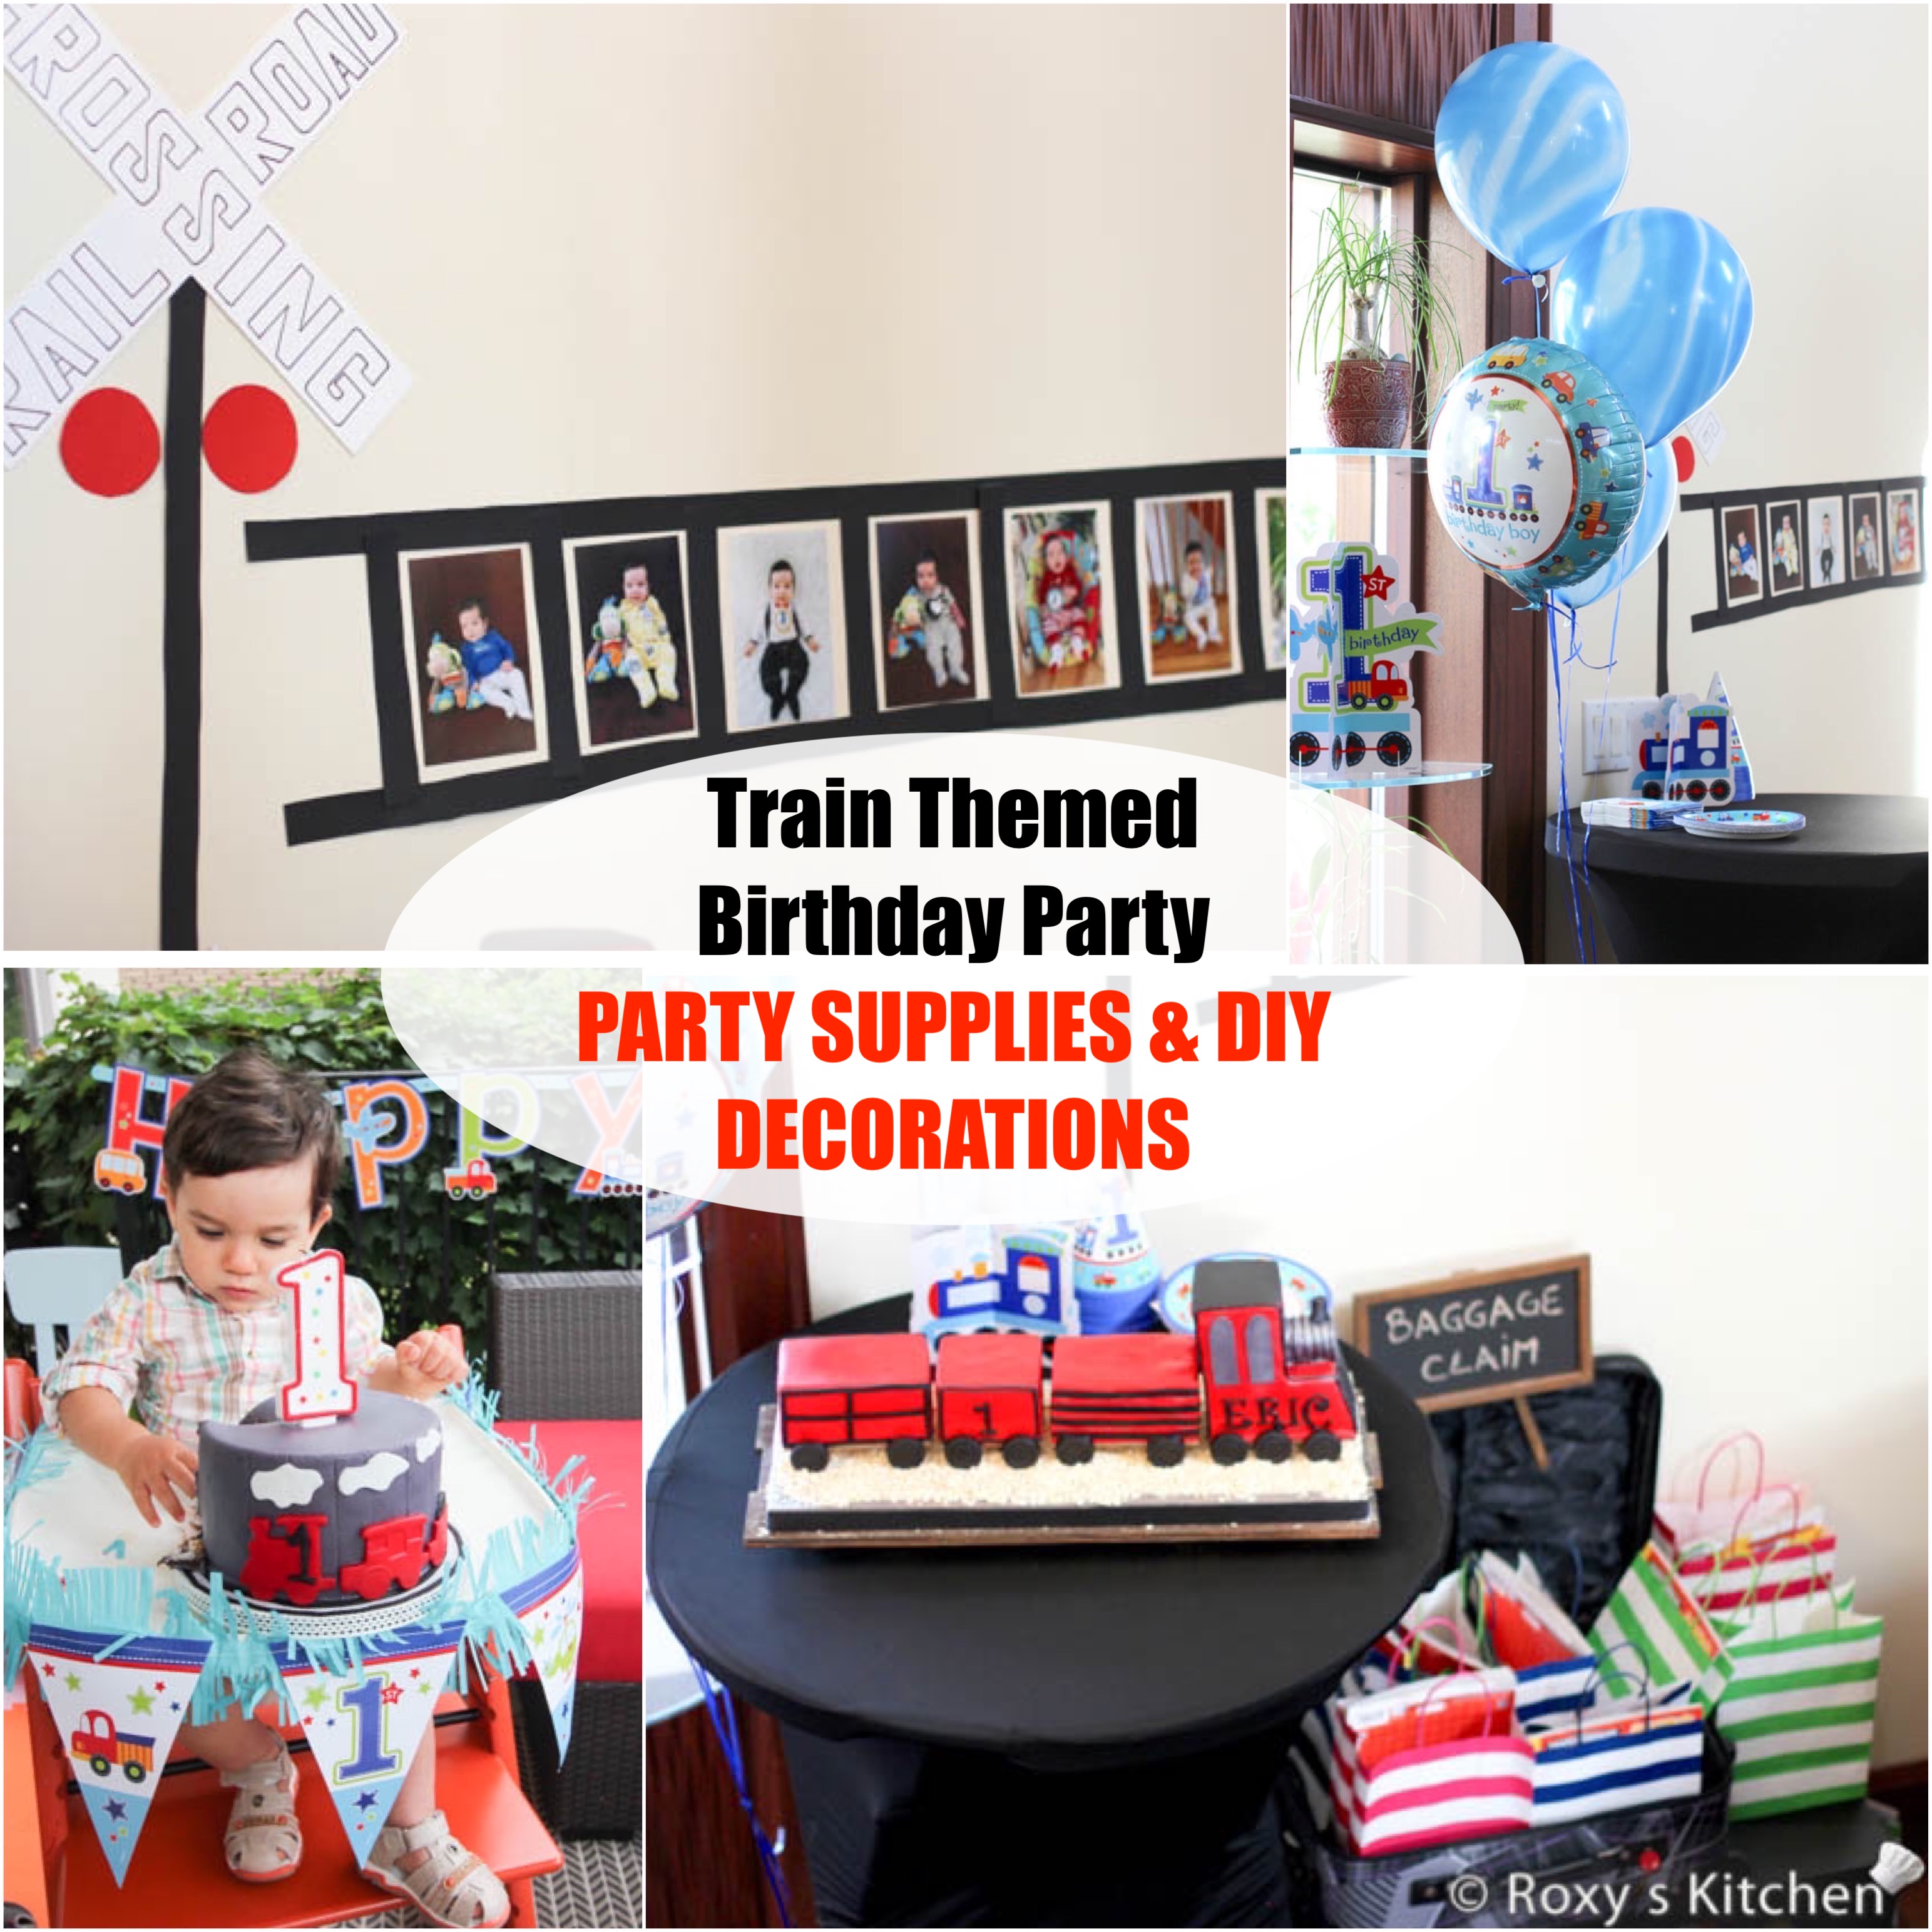 Train Themed Birthday Party - Party Supplies & DIY Decorations